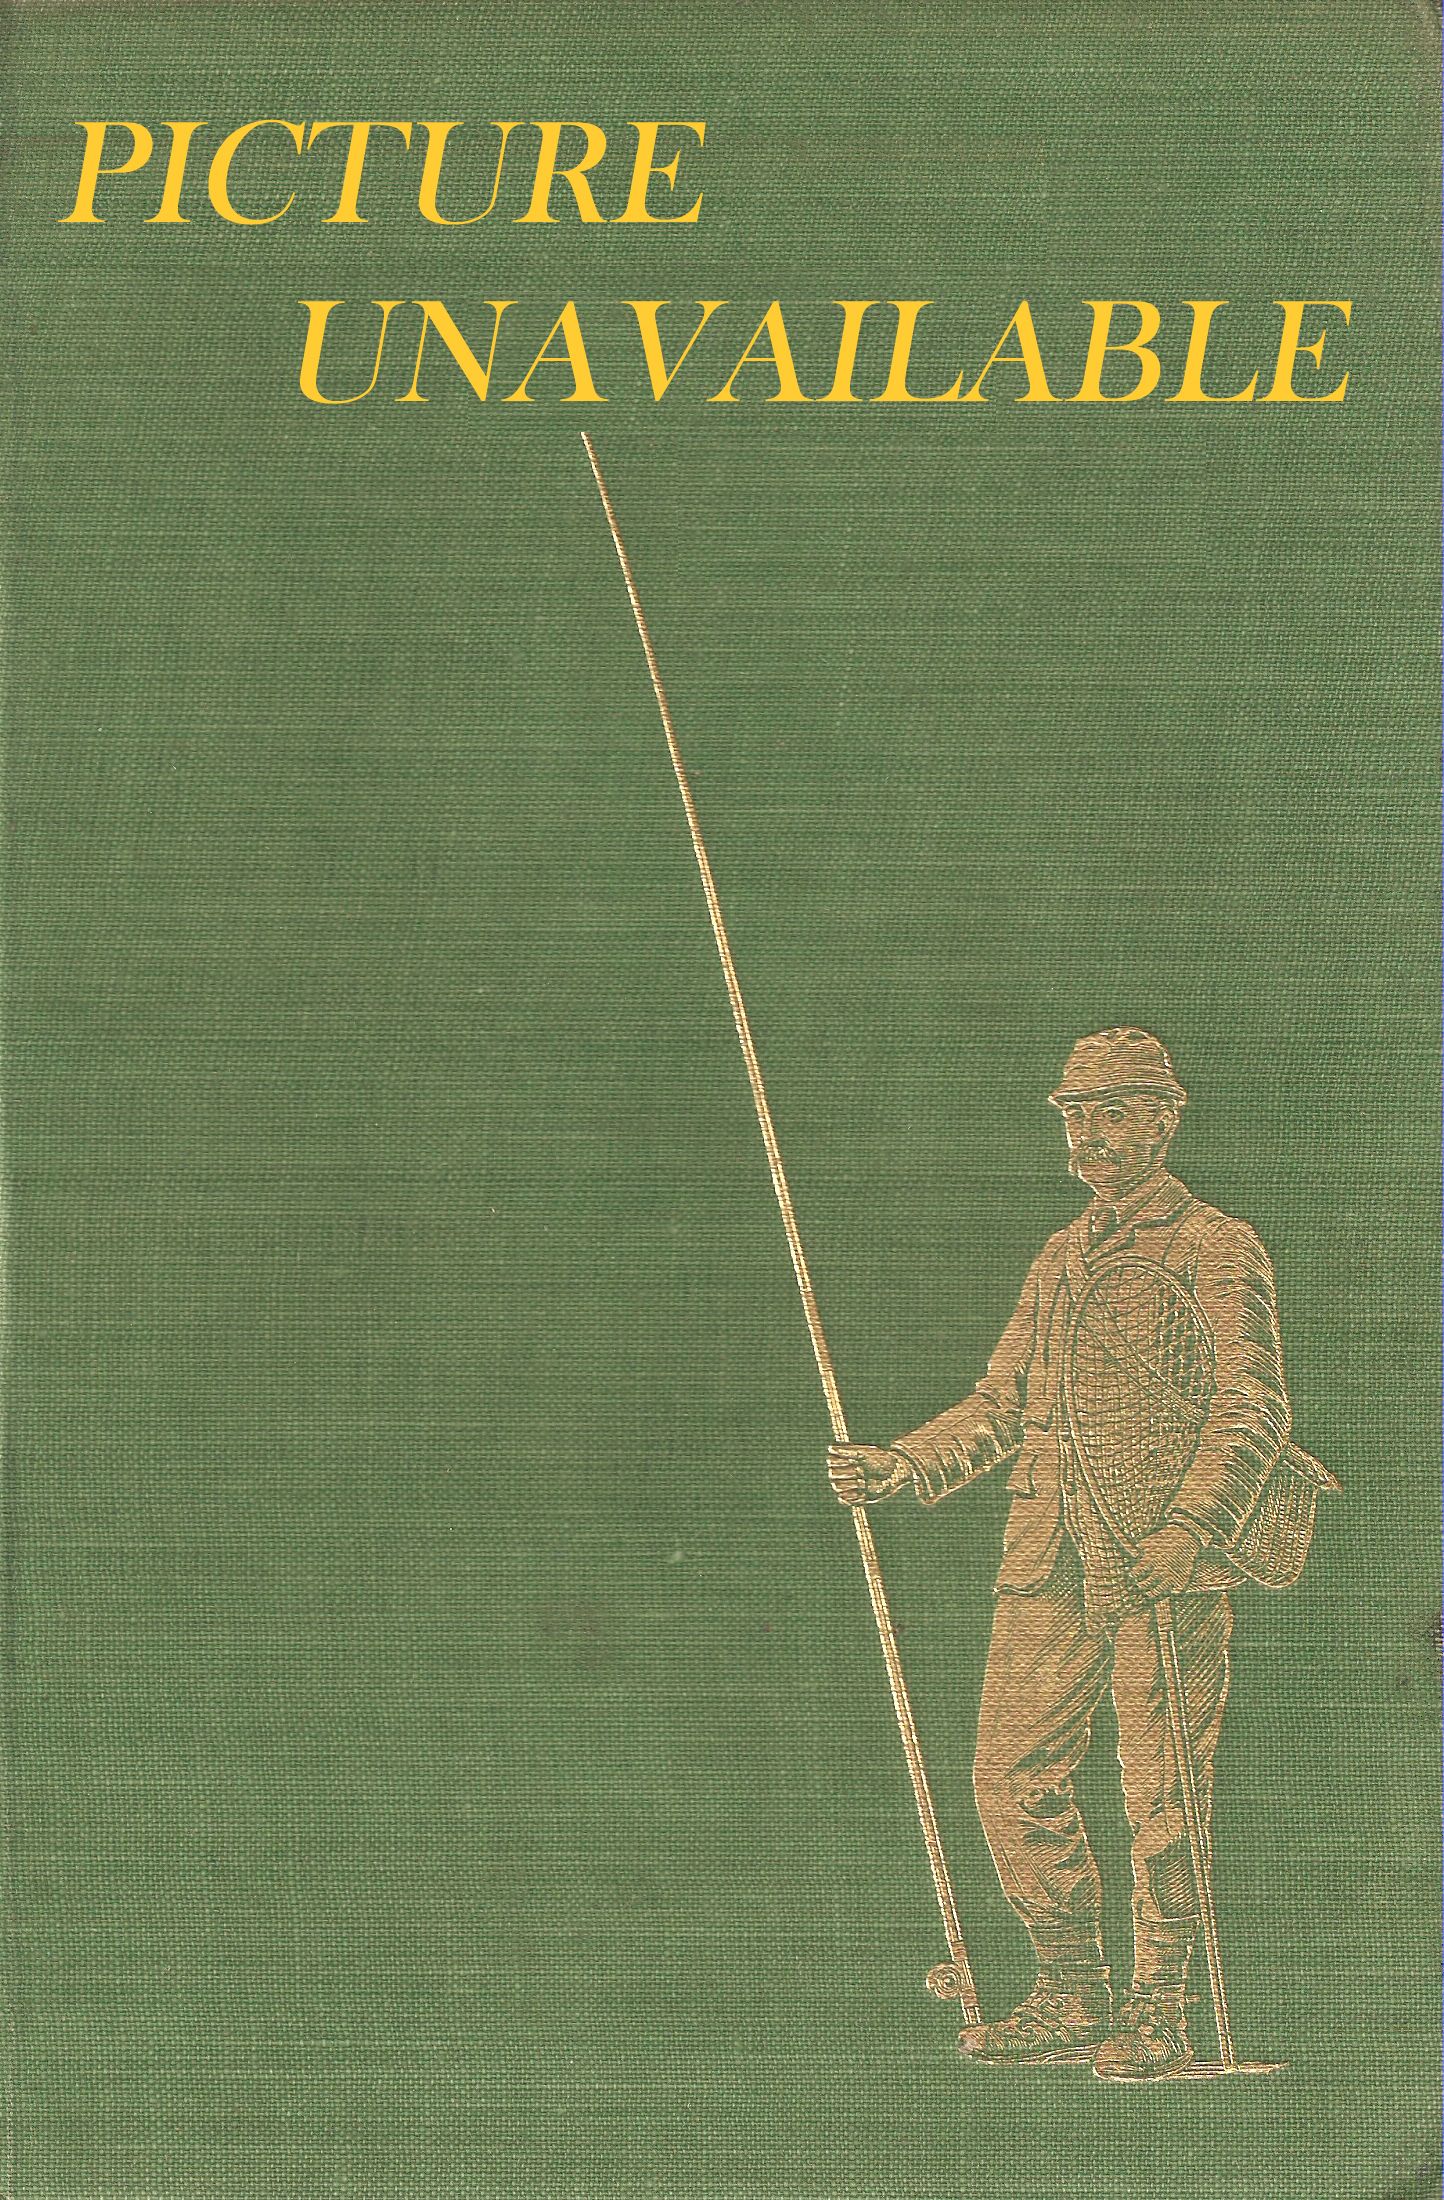 THE YOUNG ANGLER'S COMPANION: A CONCISE HANDBOOK ON ALL ASPECTS OF FISHING  FOR PLEASURE. By Clive Gammon.